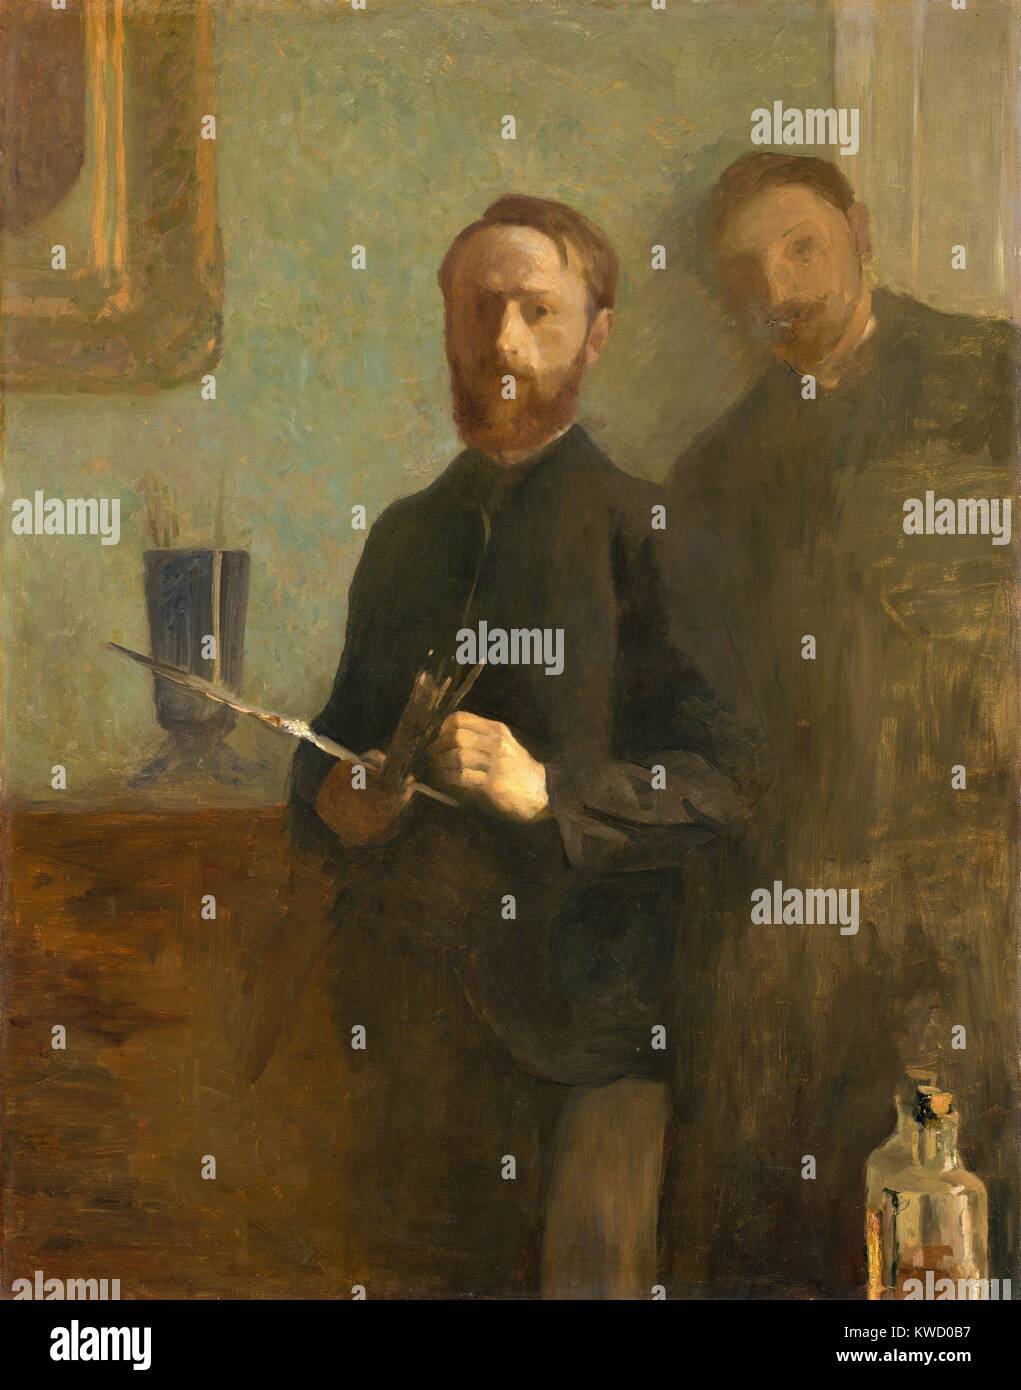 Self-Portrait with Waroquy, by Edouard Vuillard, 1889, French Post-Impressionist oil painting. The 22 year old artist holds his palette and paintbrushes. Behind him is his friend, Waroquy, with his facial features and his body sketched in. Waroquy’s name (BSLOC 2017 5 96) Stock Photo